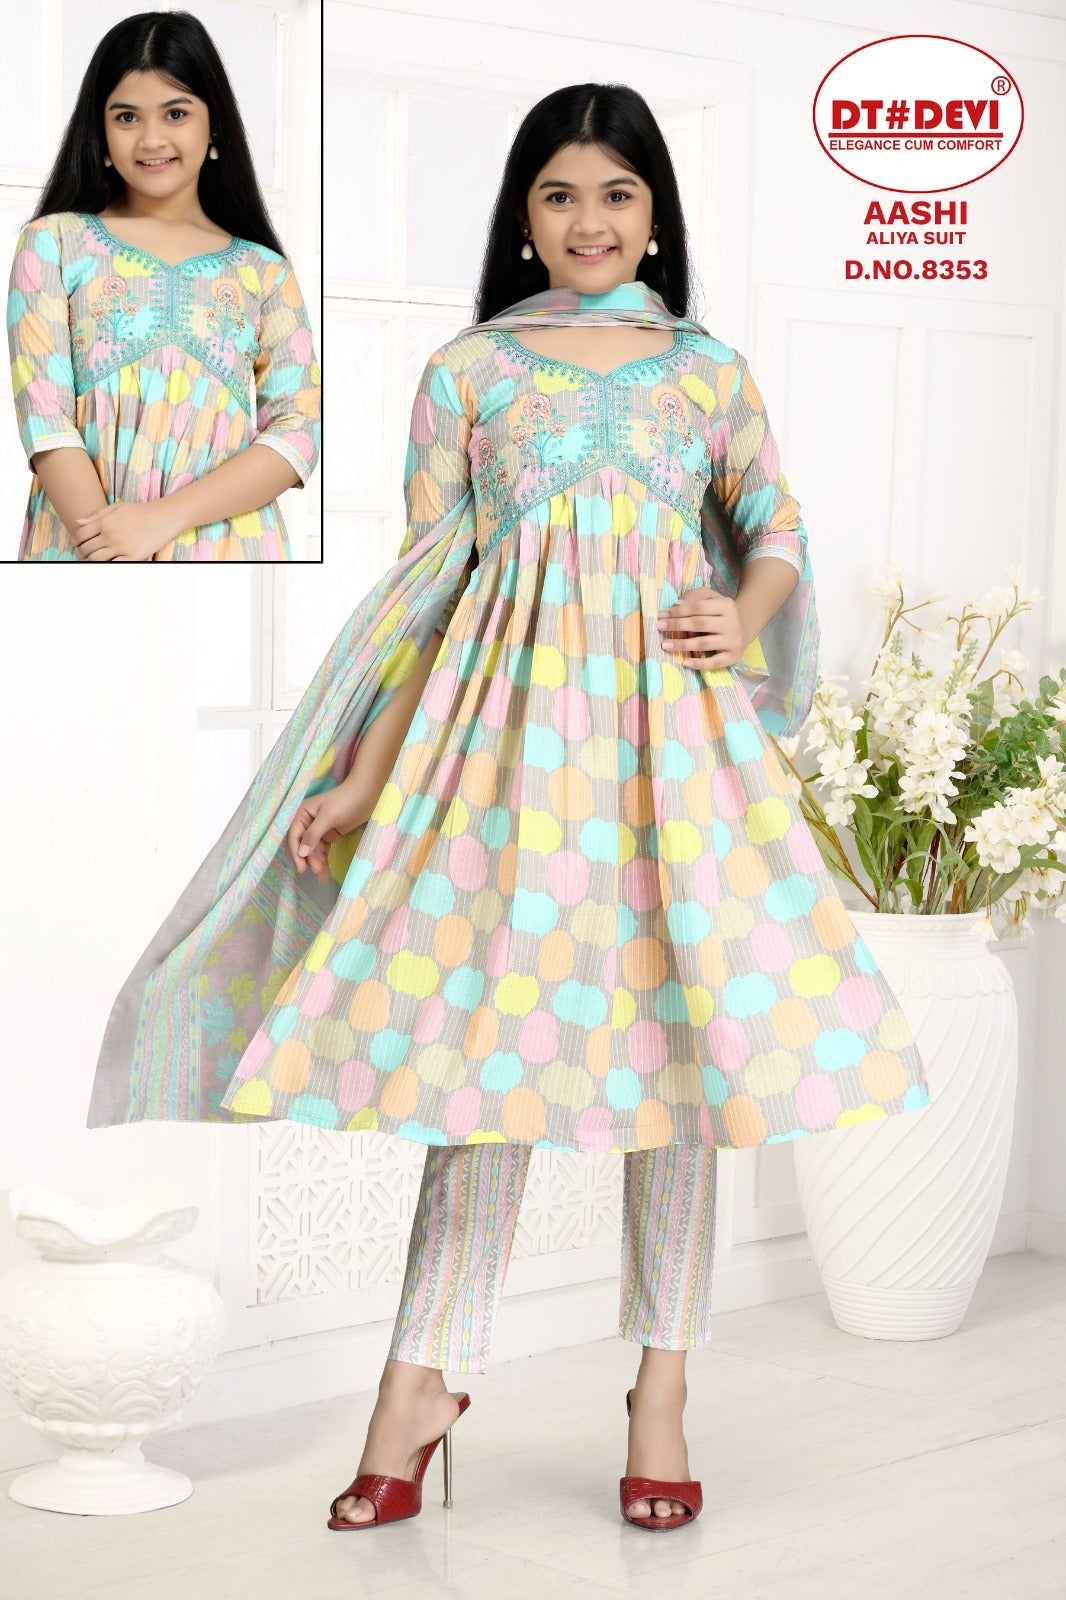 Aashi-8353 Dt Devi Cotton Girls Readymade Pant Suits